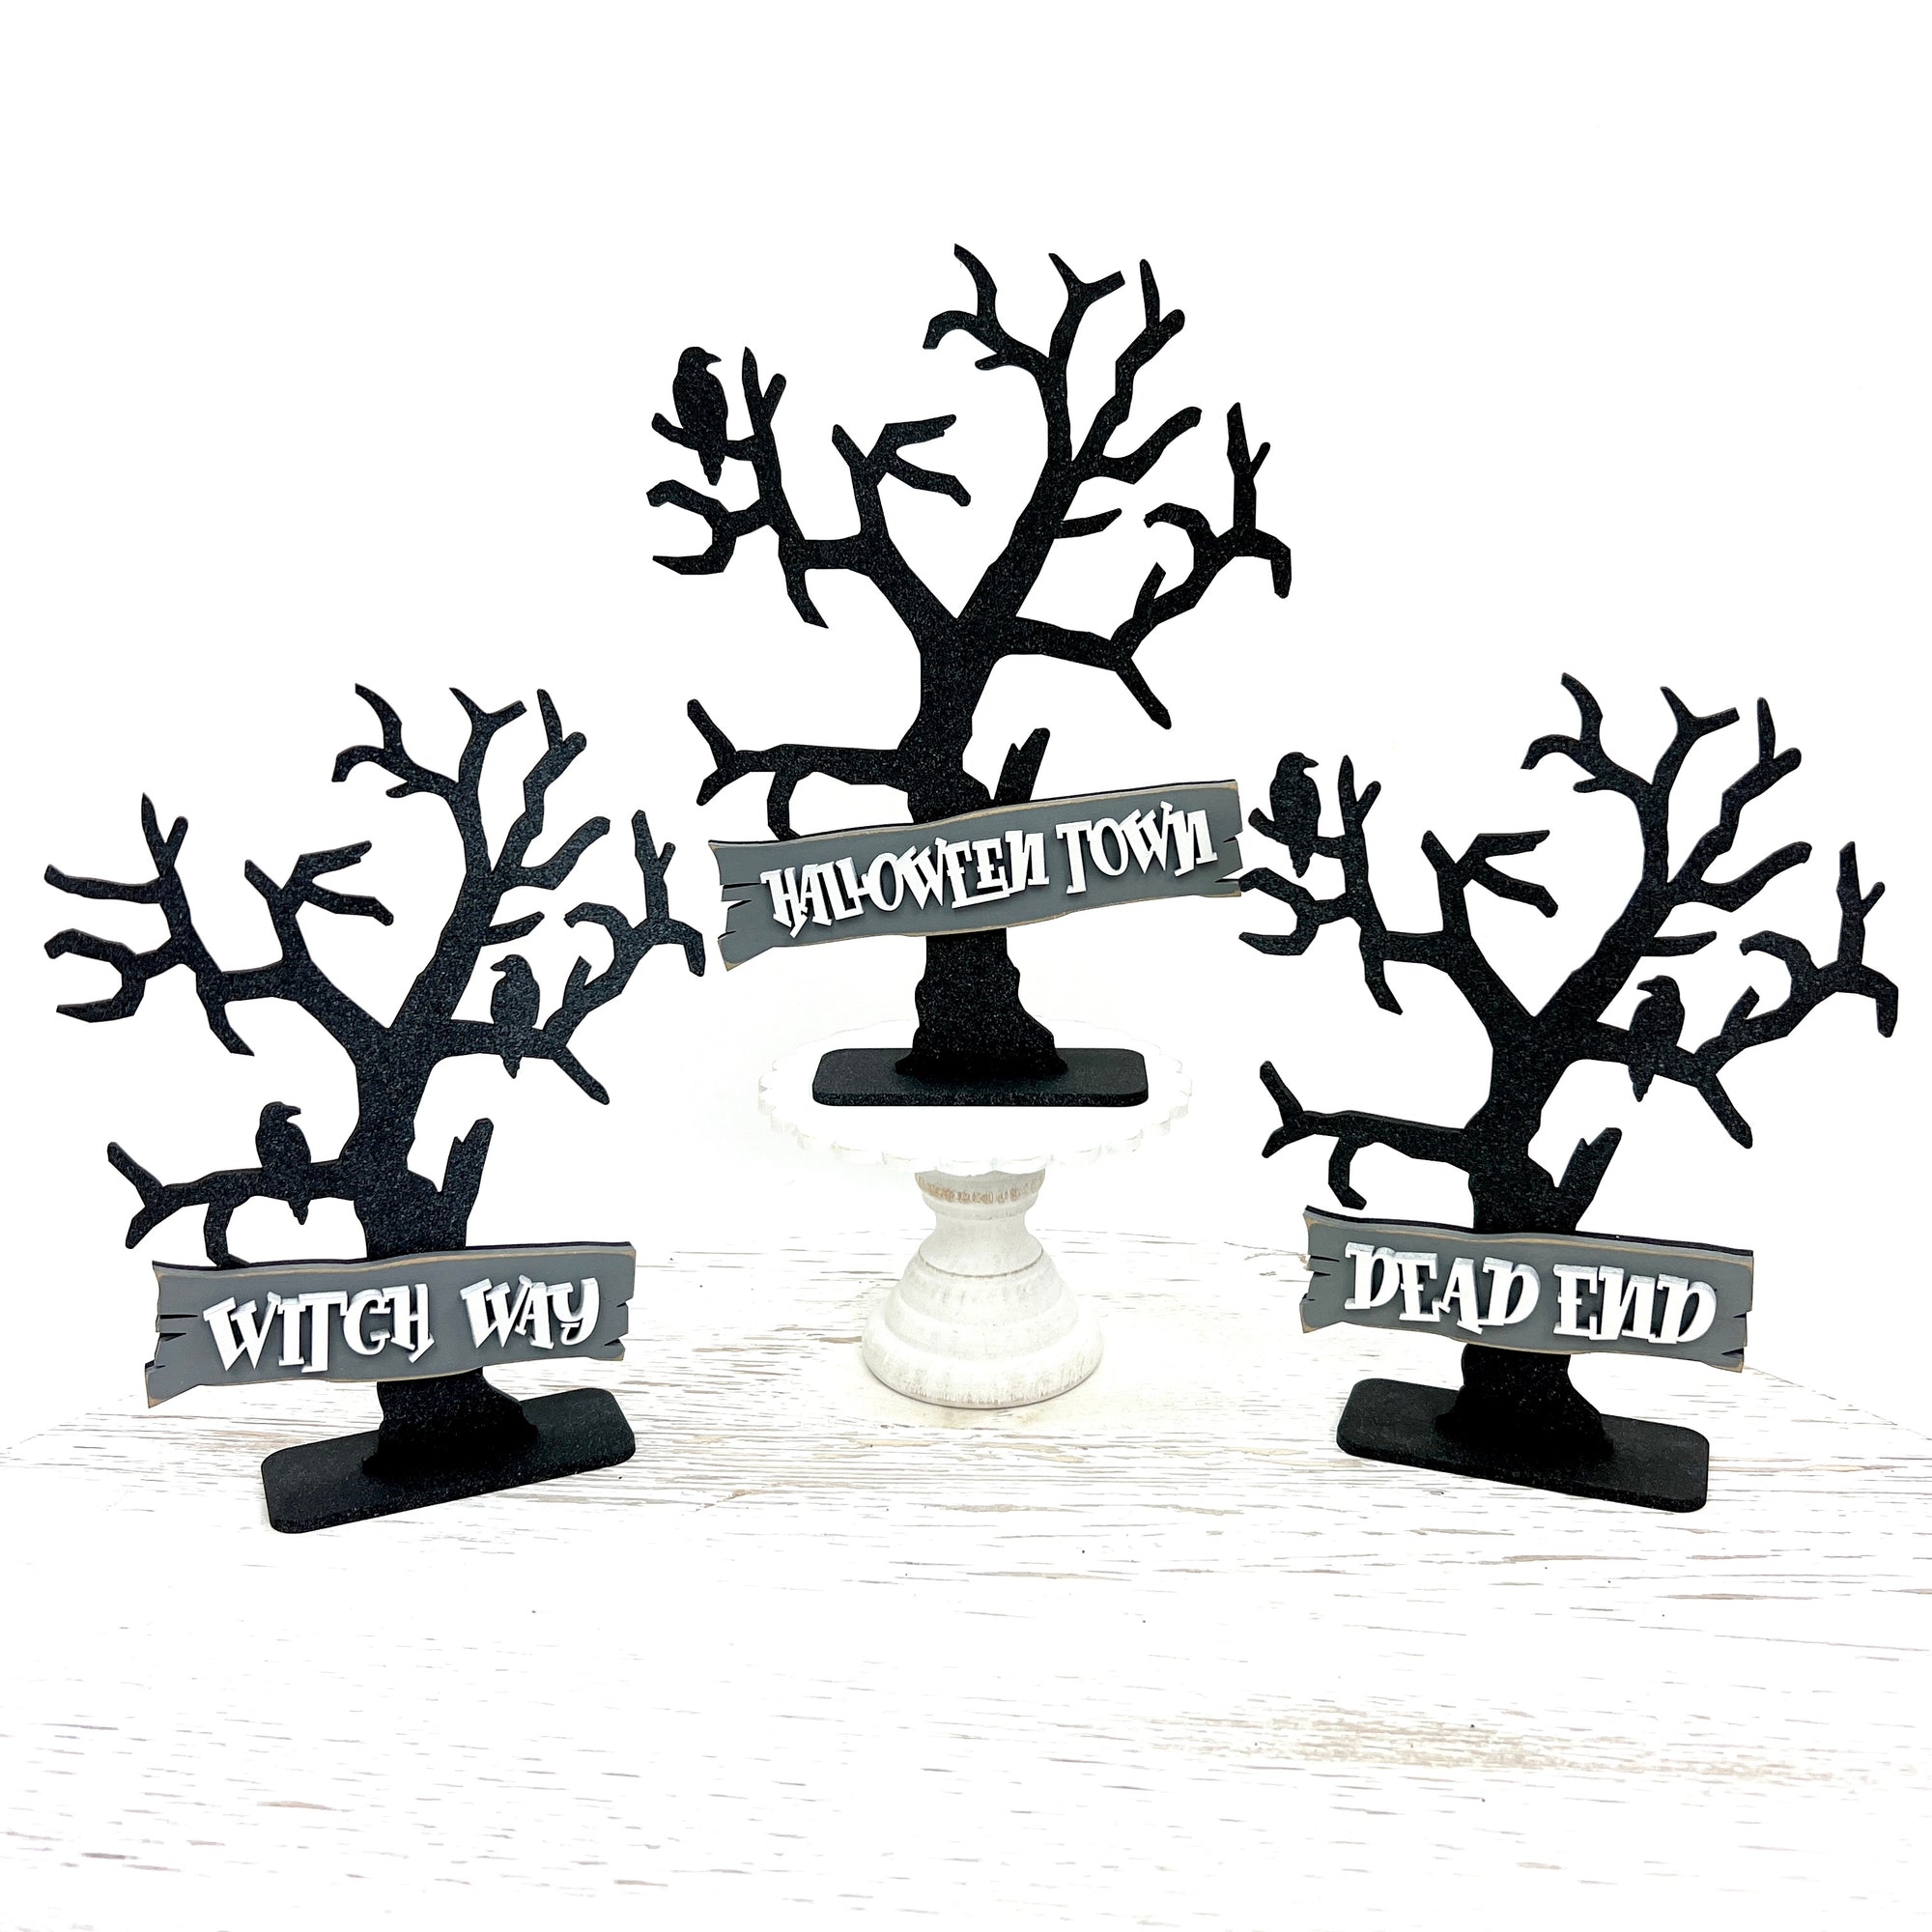 black spooky wood trees with street signs for Halloween decorations wood decor craft kit